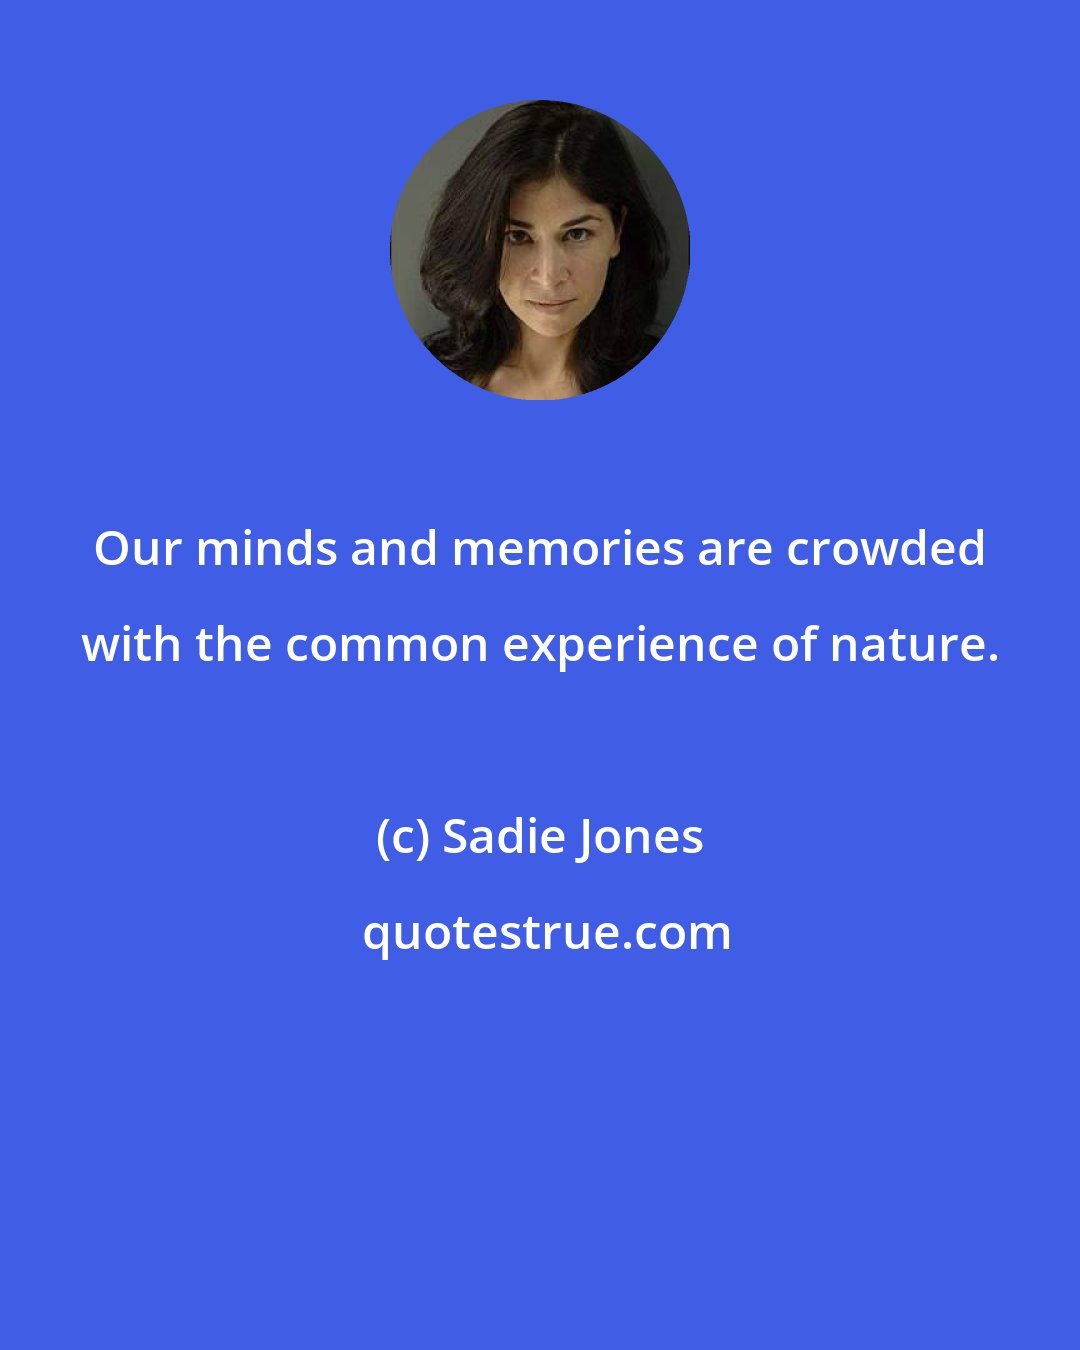 Sadie Jones: Our minds and memories are crowded with the common experience of nature.